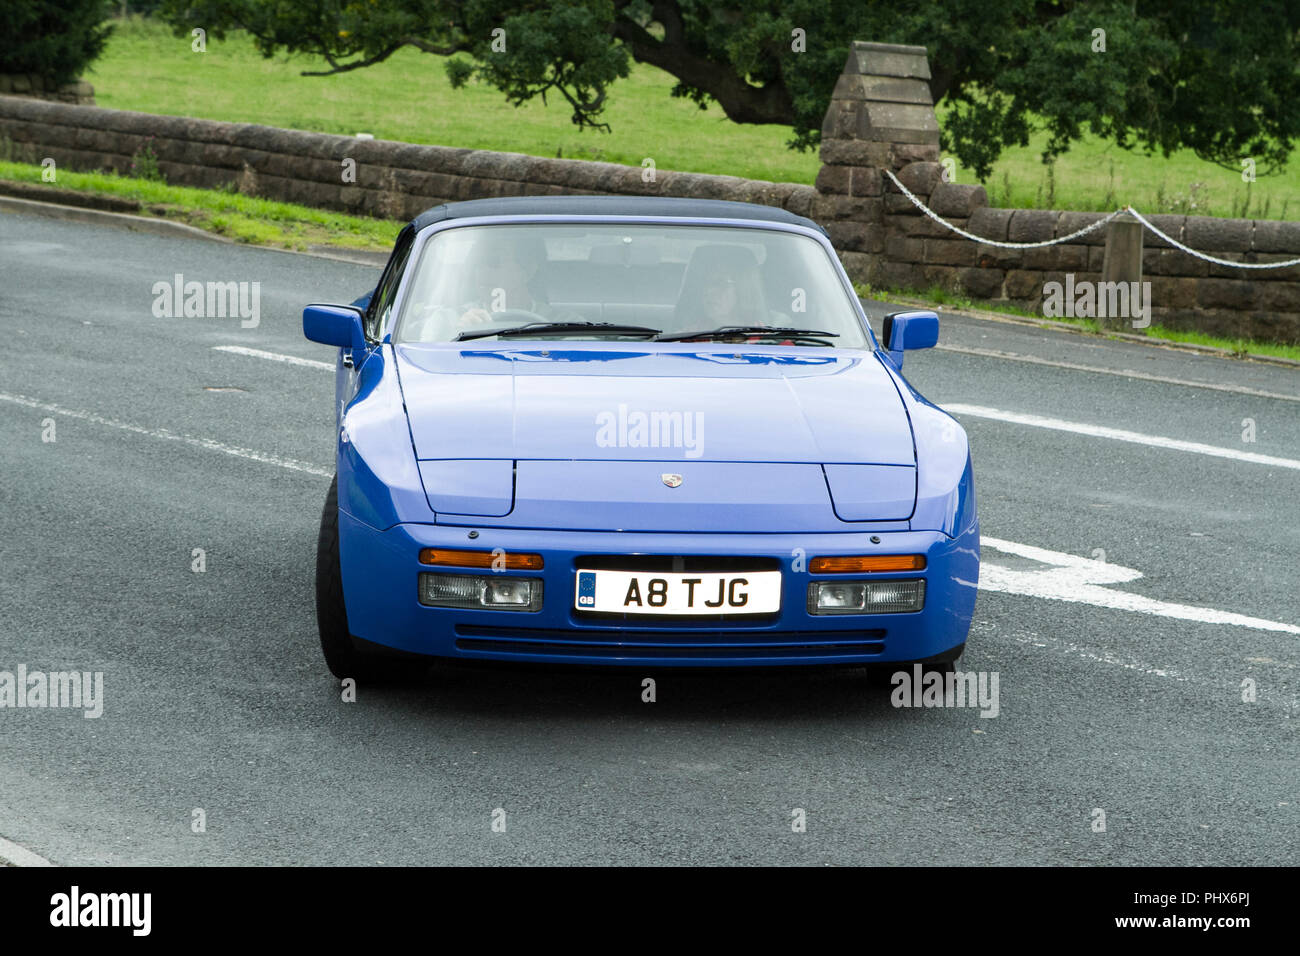 1993 blue A8TJG  Porsche 944 Turbo Cabriolet at Hoghton towers annual classic vintage car rally, UK Stock Photo